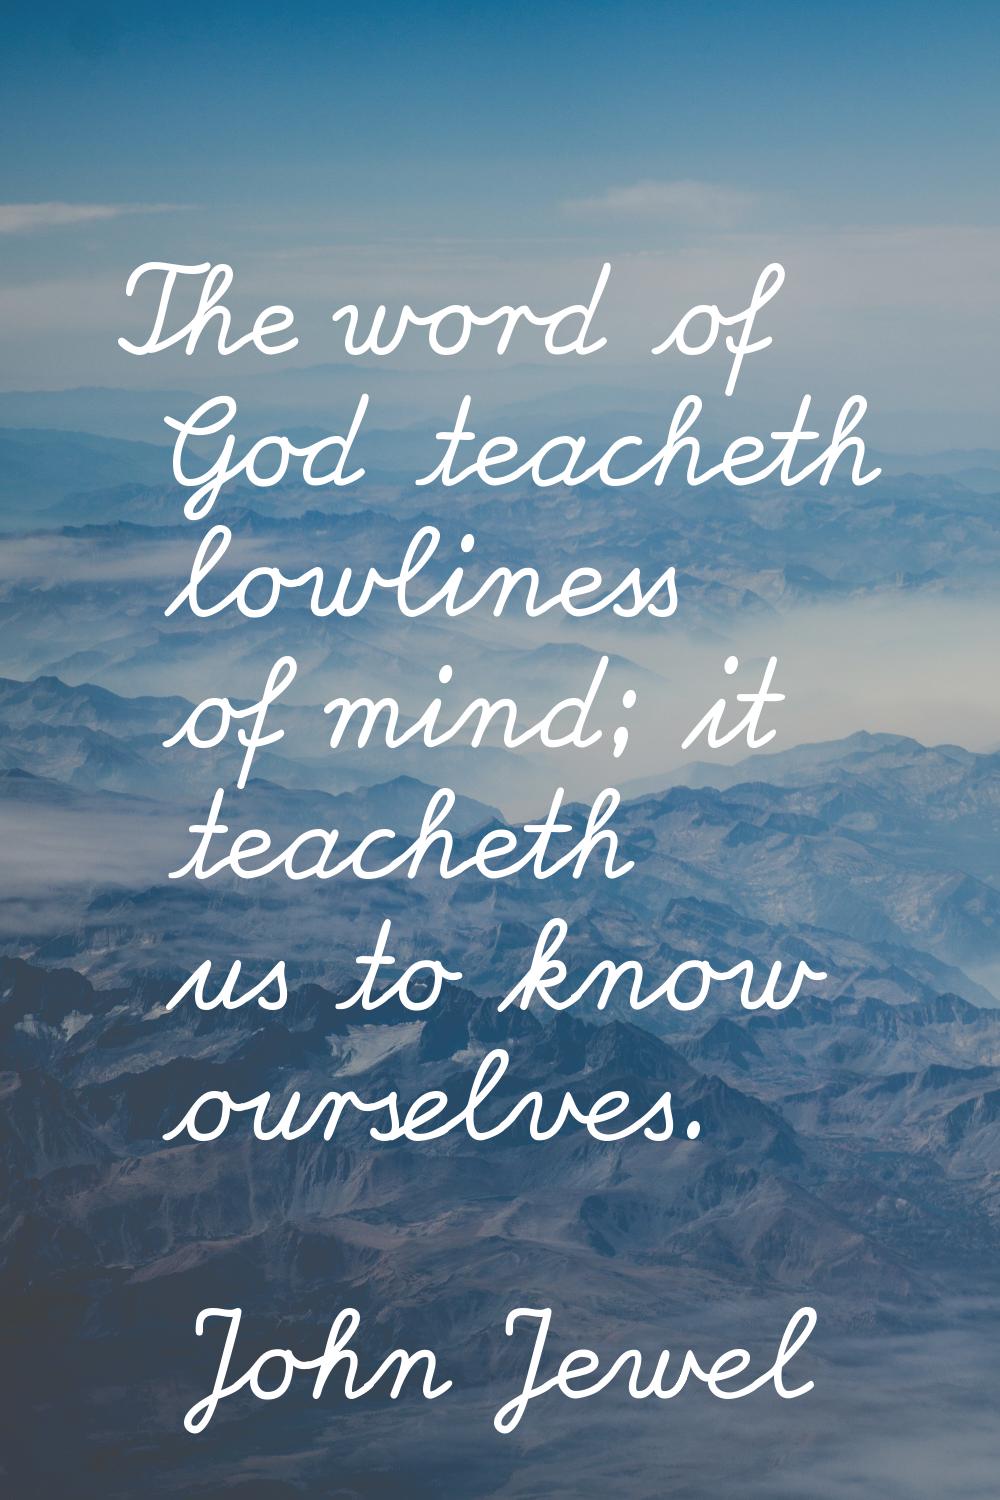 The word of God teacheth lowliness of mind; it teacheth us to know ourselves.